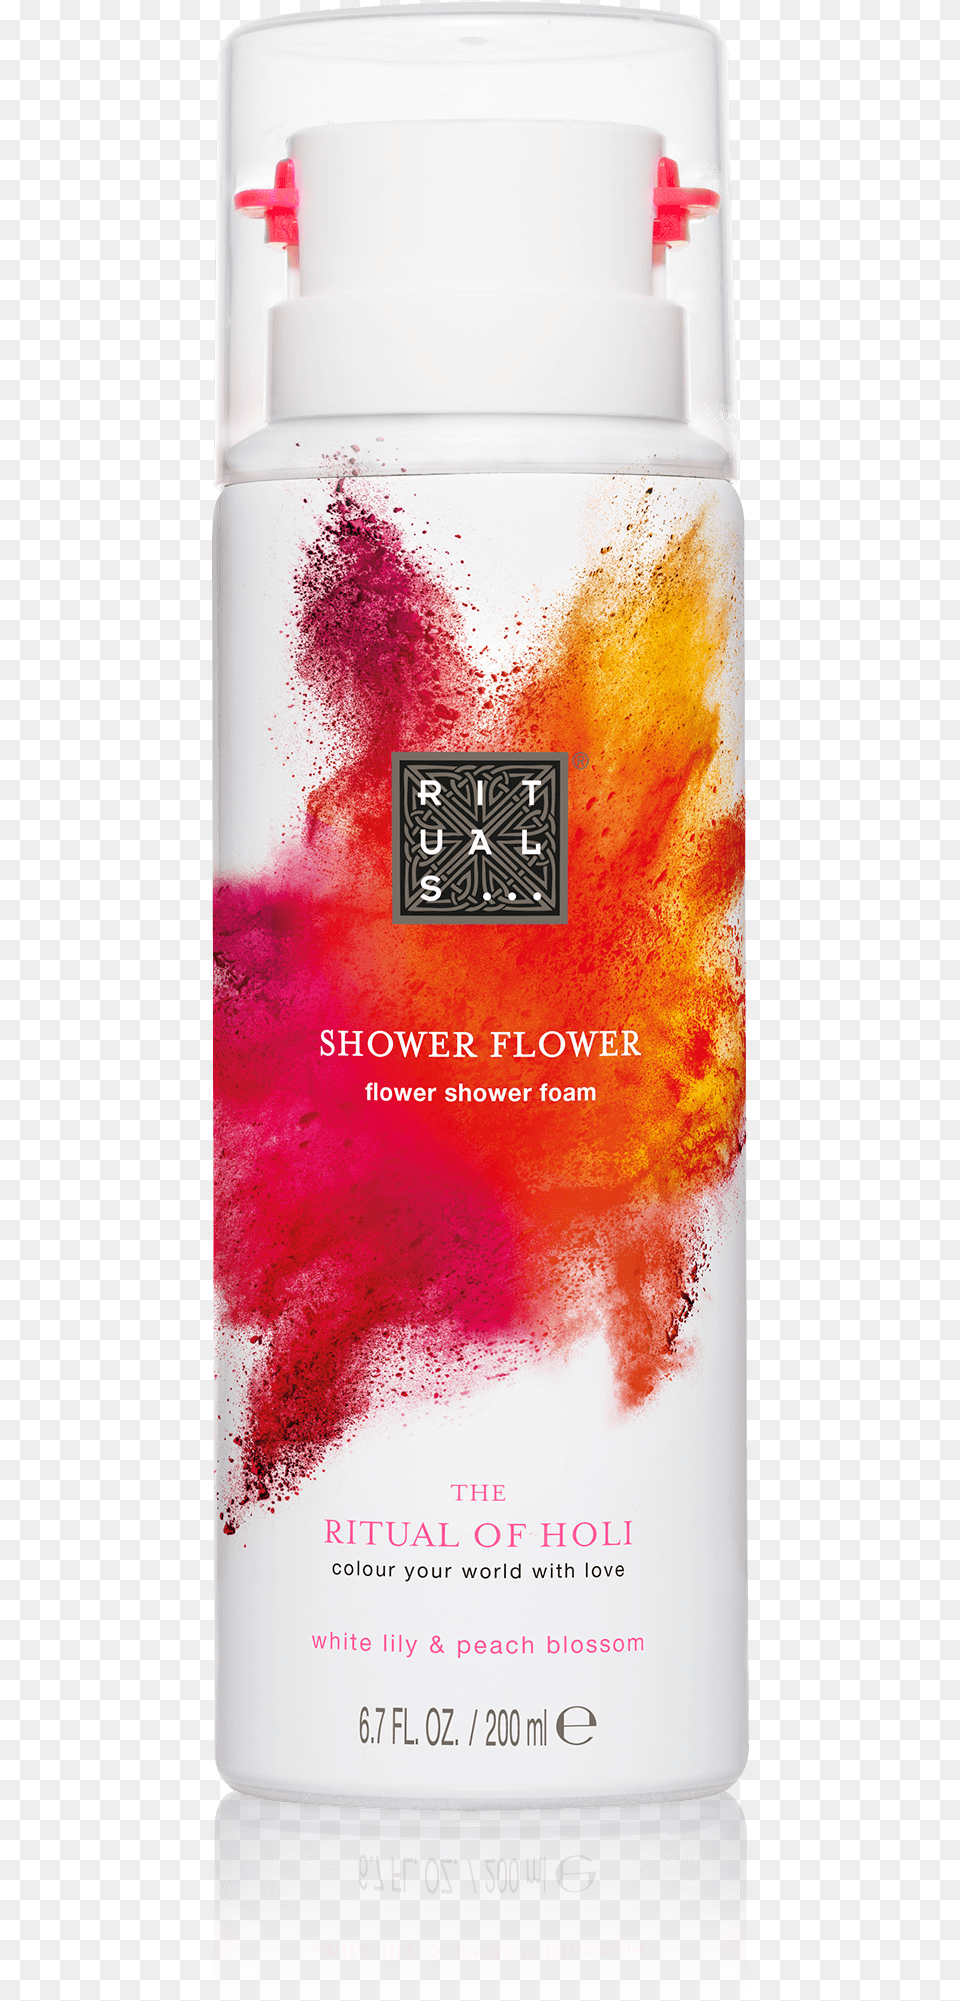 The Ritual Of Holi Shower Foam Flower Rituals Shower Jelly, Advertisement, Cosmetics, Poster, Can Png Image